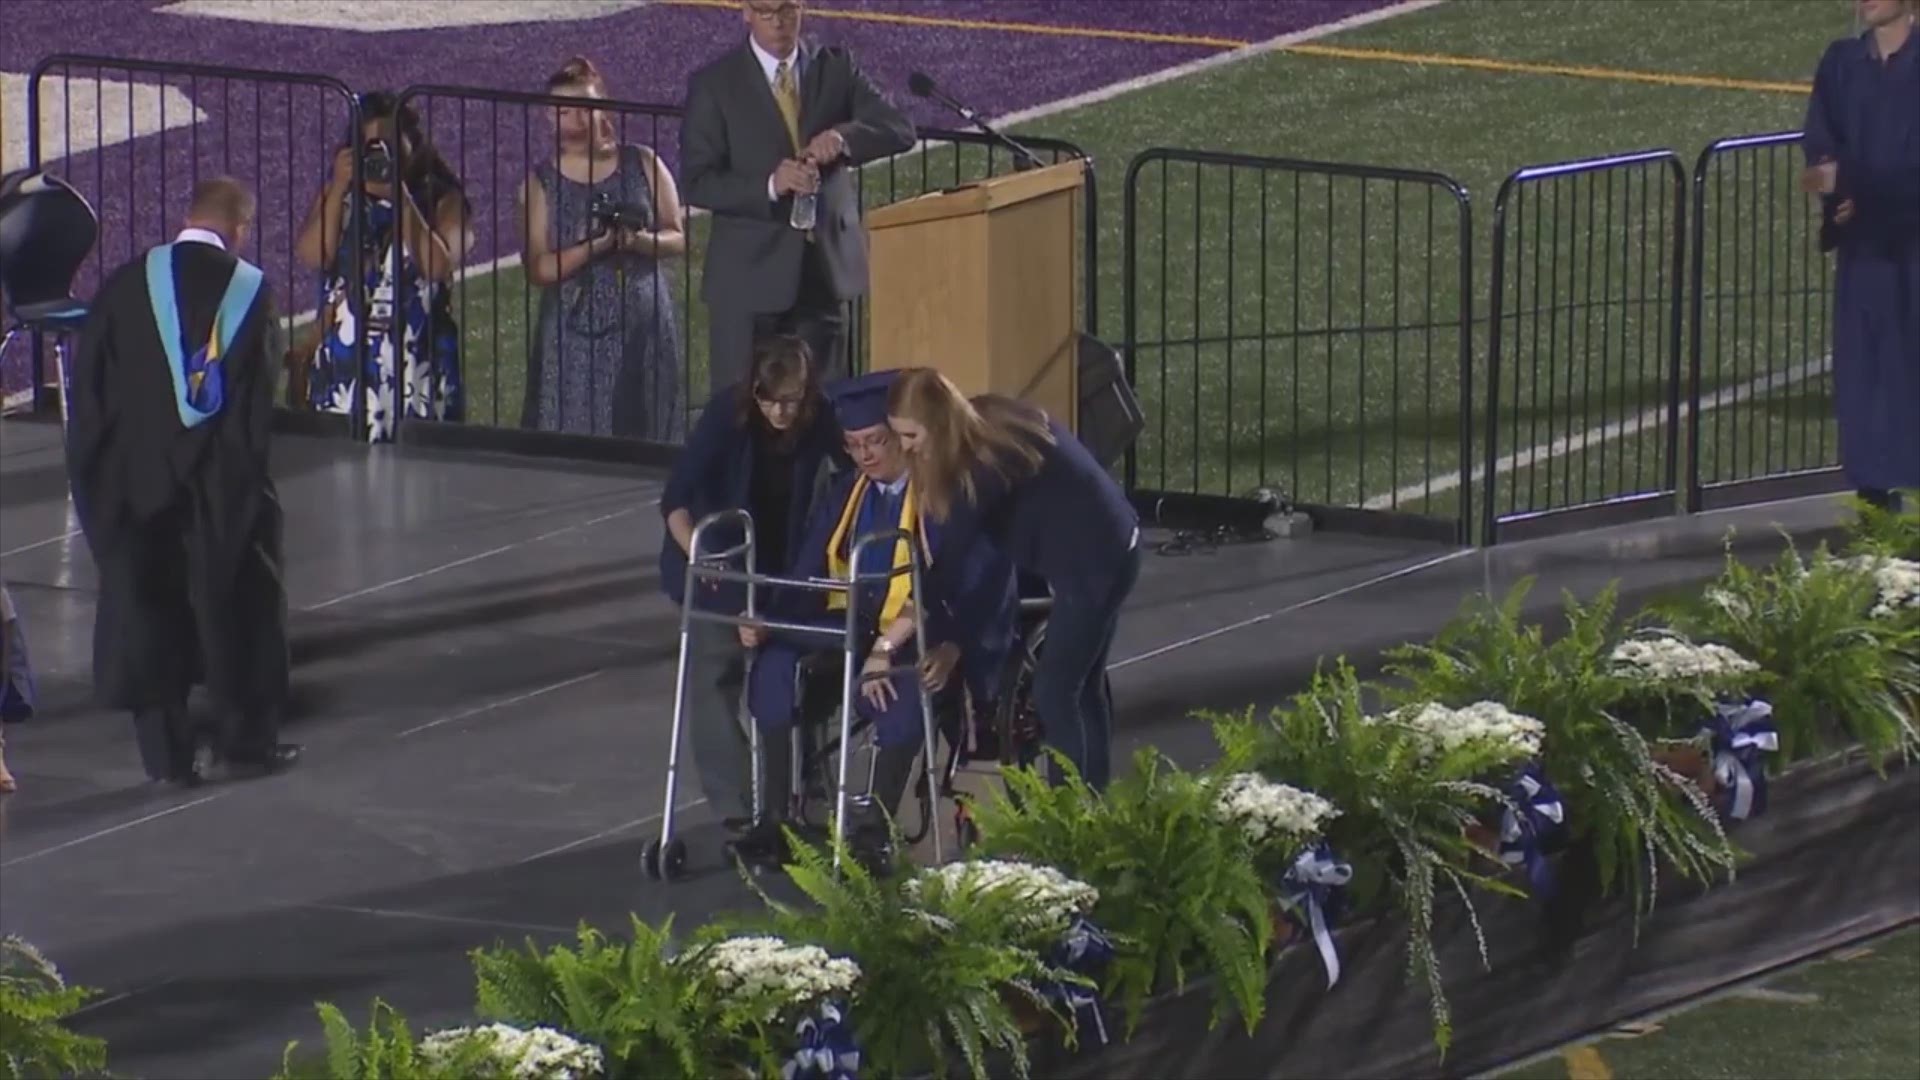 A rare illness left Mason Smith paralyzed from the waist down in 2017. His mother said he worked hard to recover and walk at his graduation ceremony. (VIDEO: Courtesy of Boerne ISD)